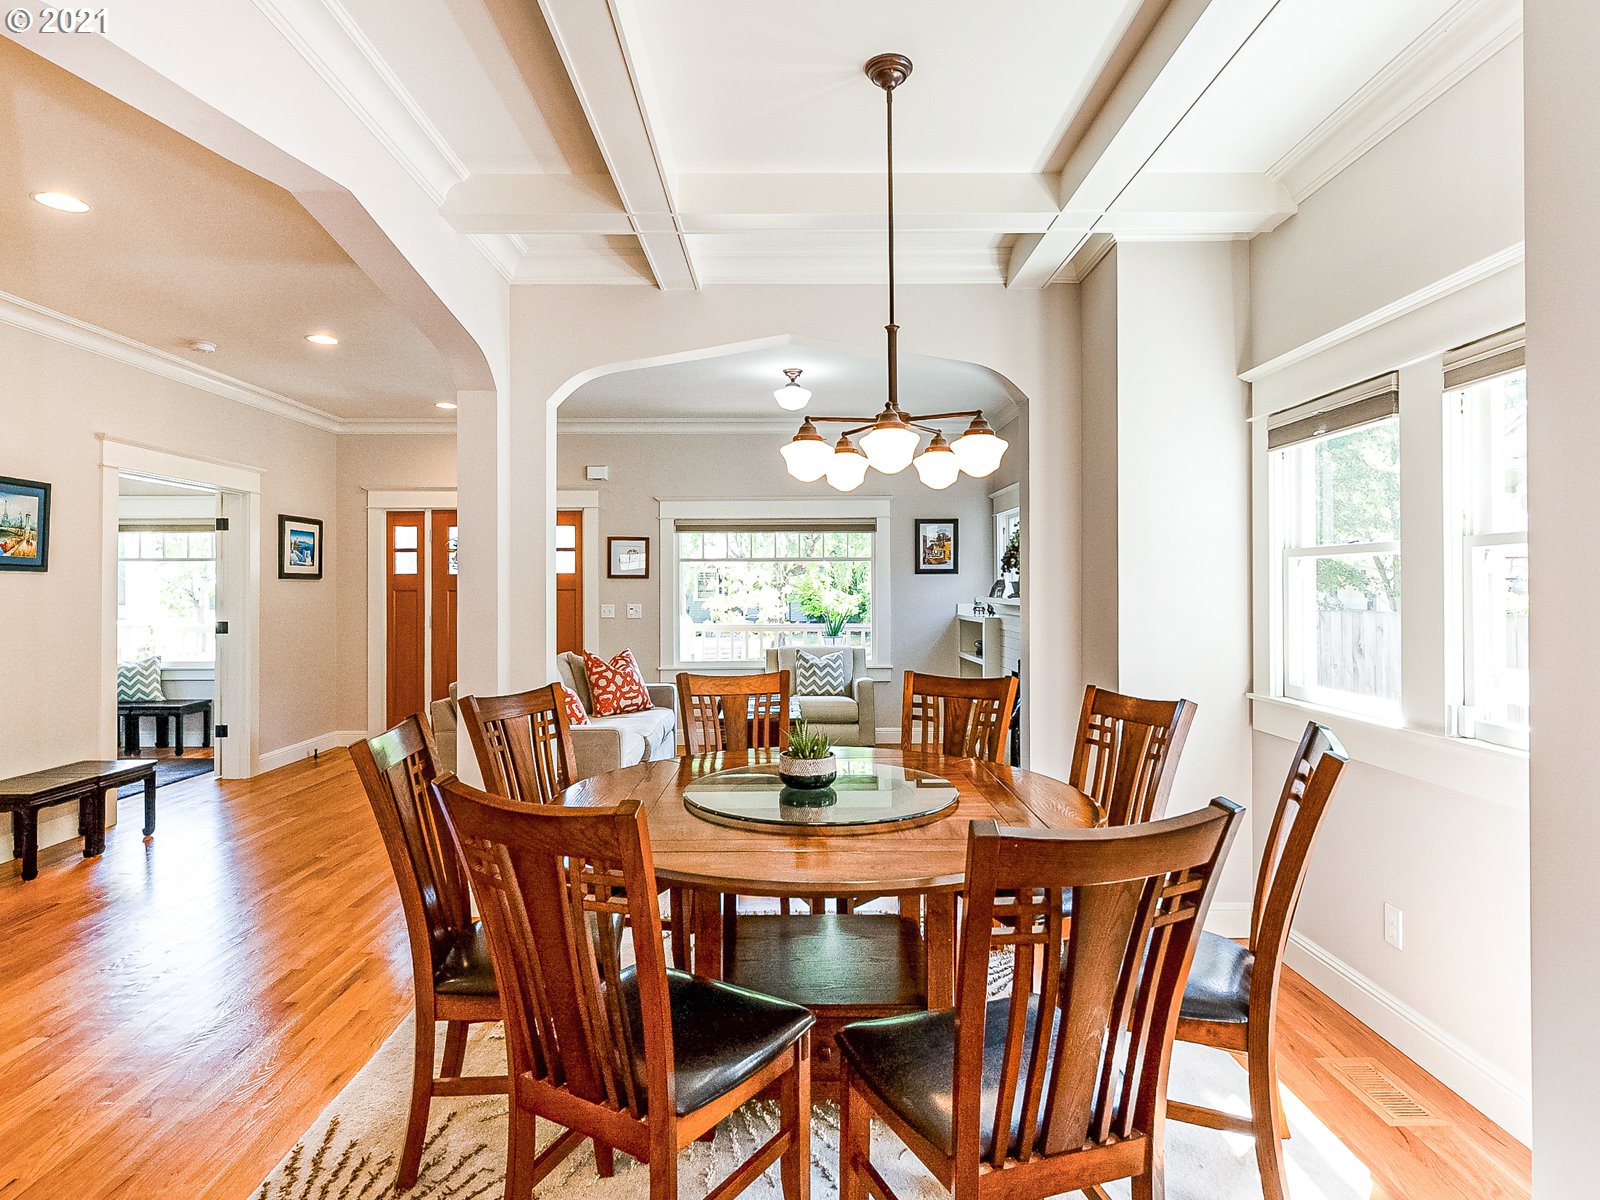 Dining Room-Coffered Ceilings